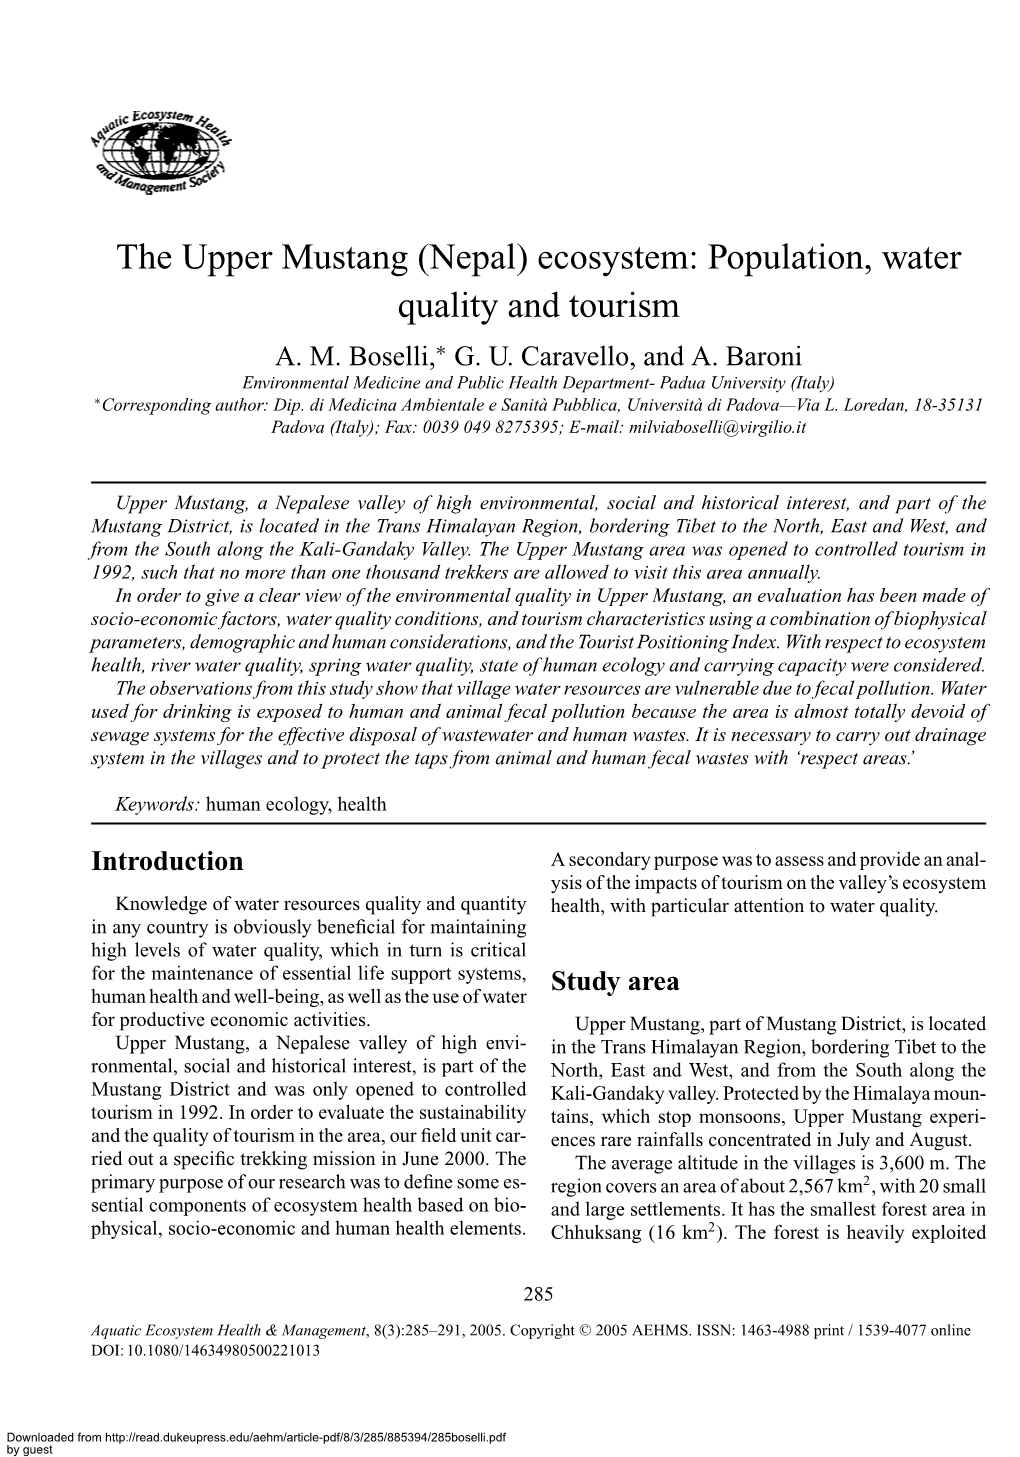 The Upper Mustang (Nepal) Ecosystem: Population, Water Quality and Tourism A